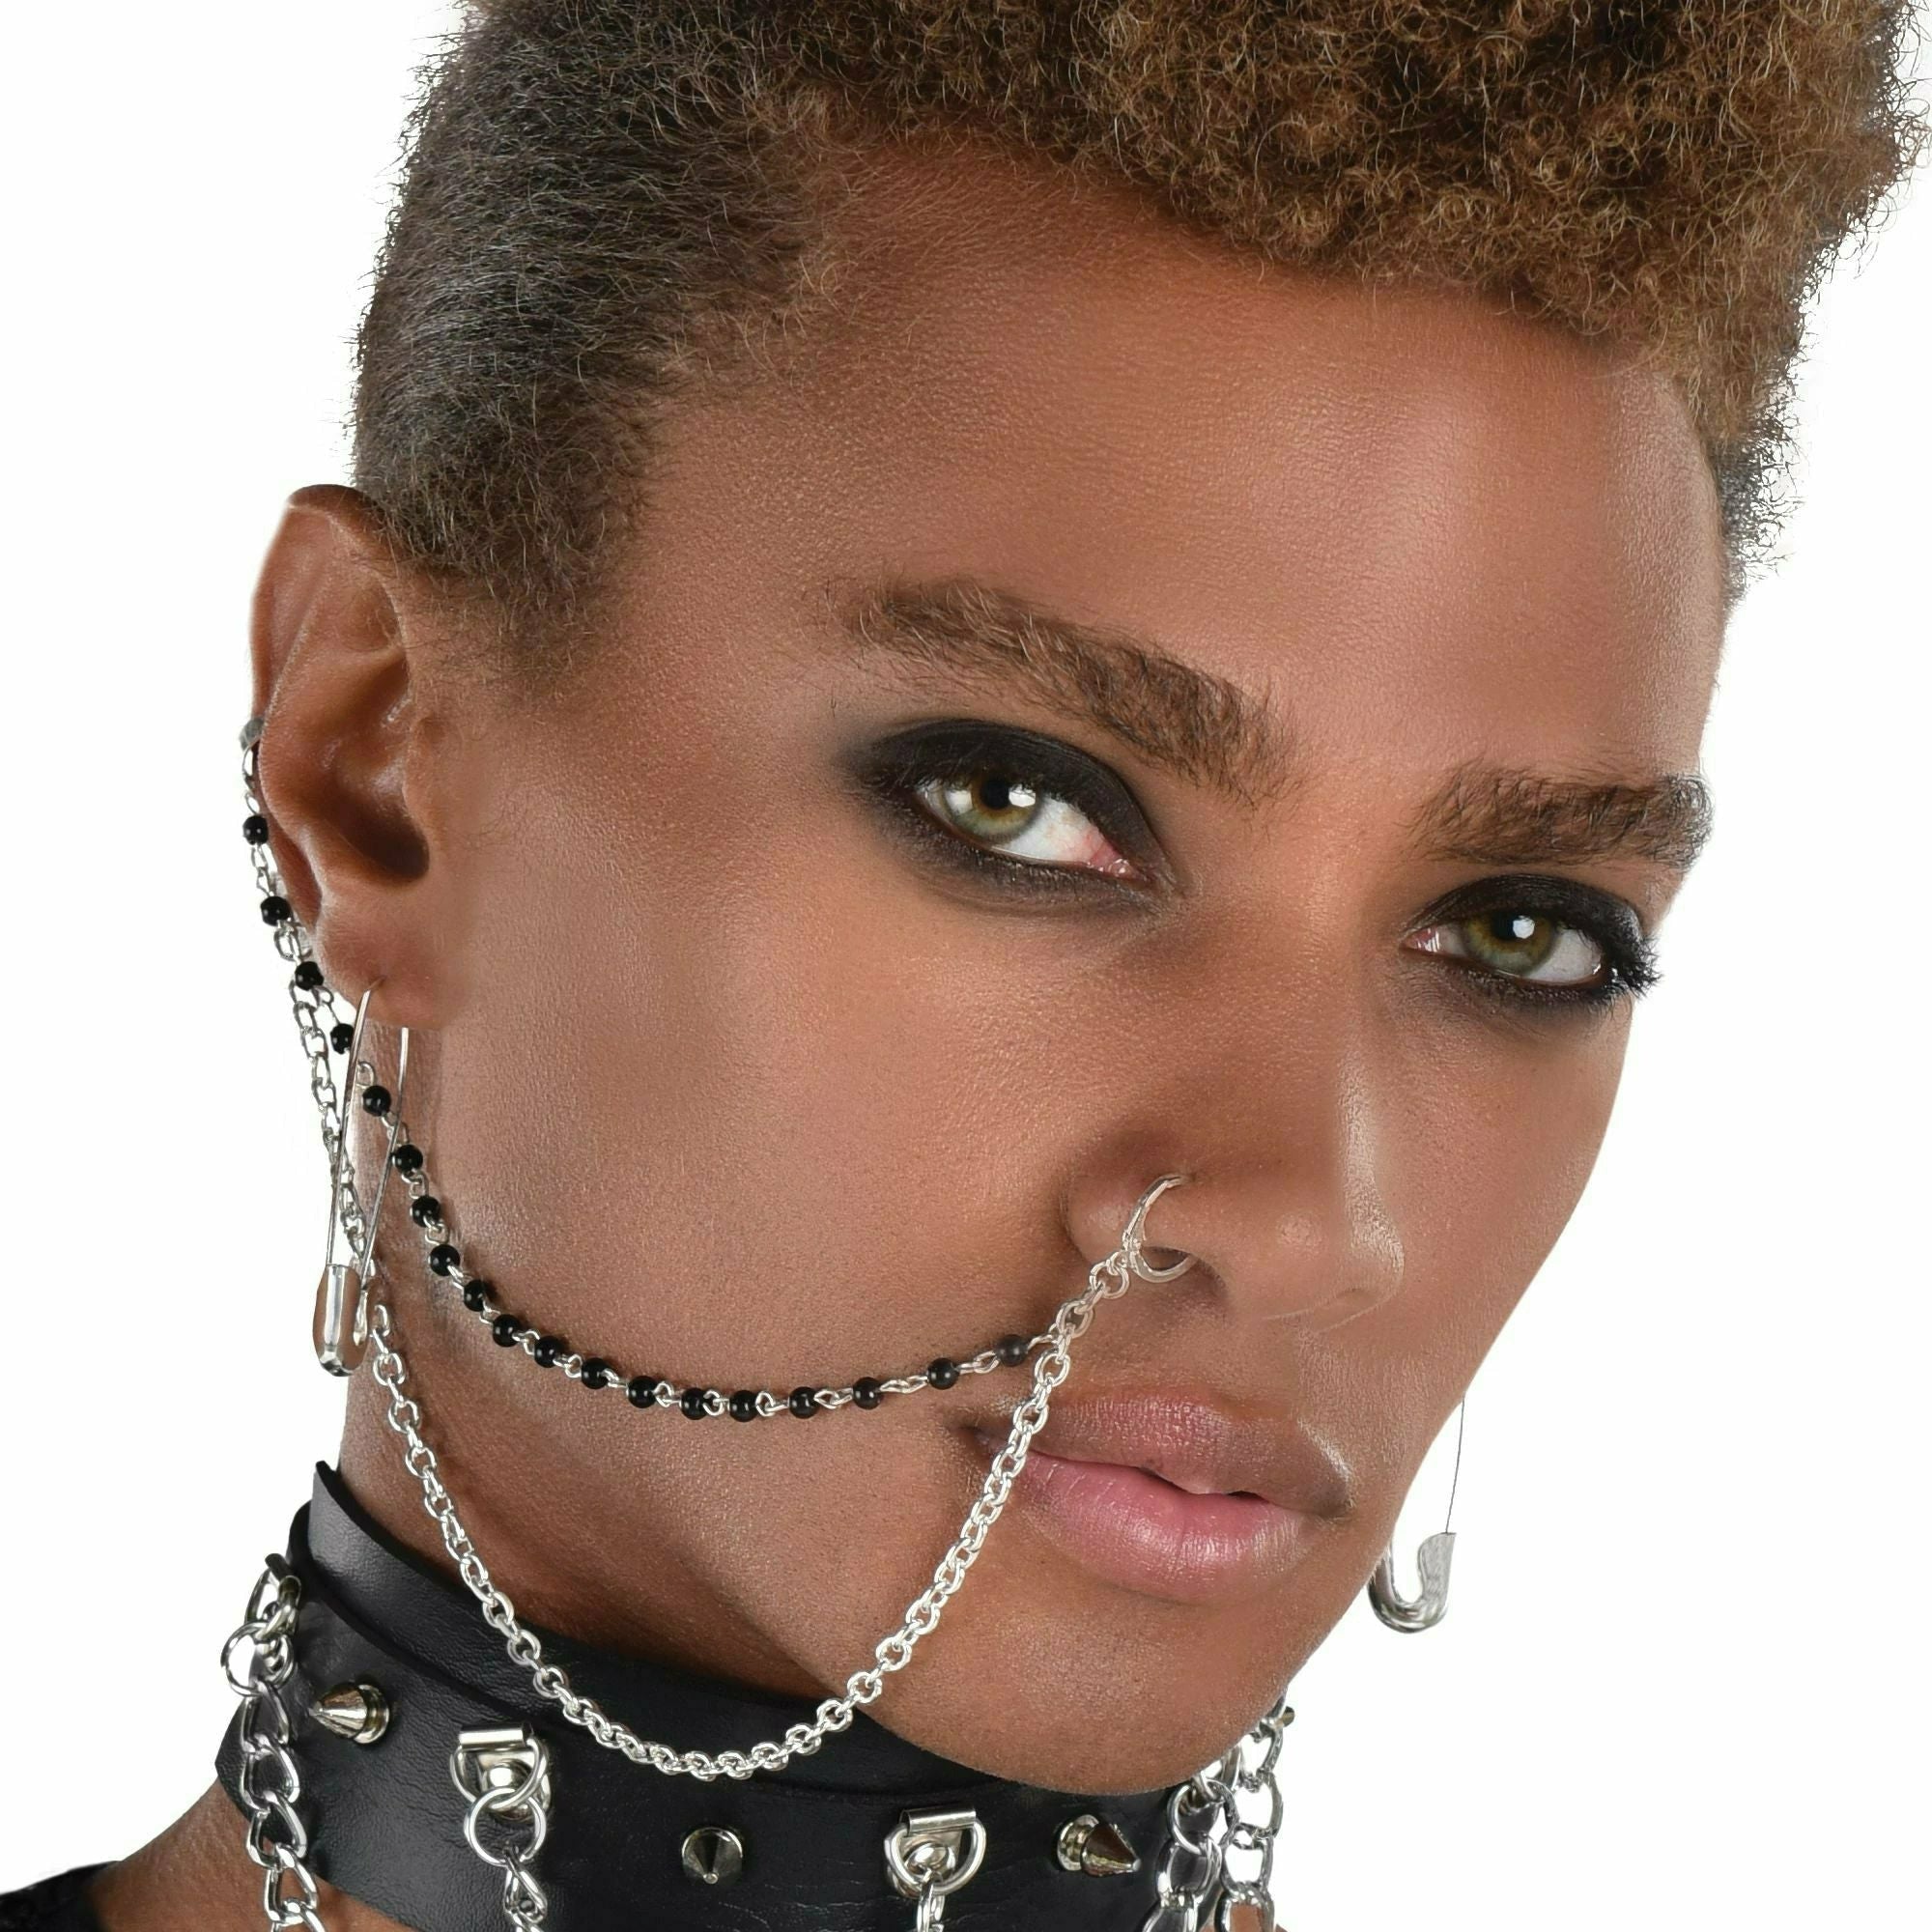 Amscan COSTUMES: ACCESSORIES Safety Pin Earrings And Nose Chain Kit